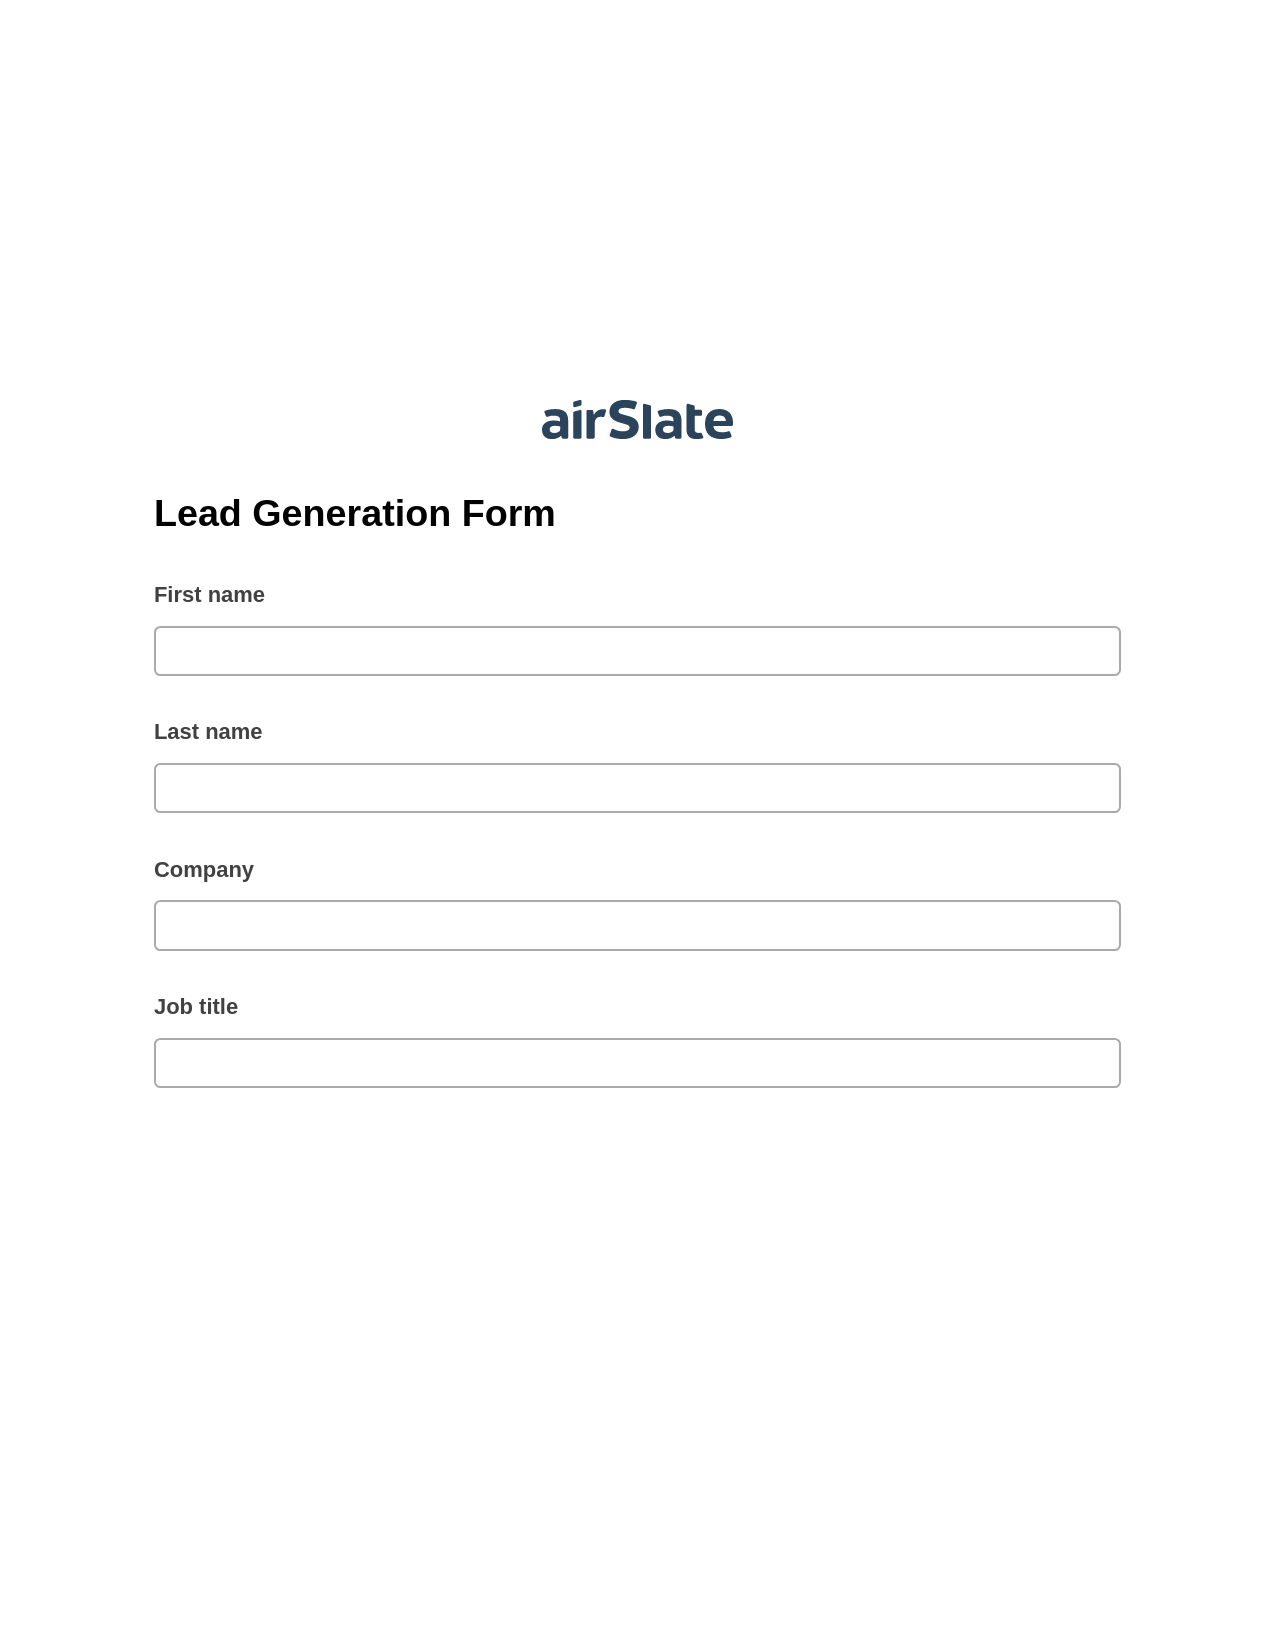 Lead Generation Form Pre-fill from another Slate Bot, Slack Notification Bot, Export to Excel 365 Bot